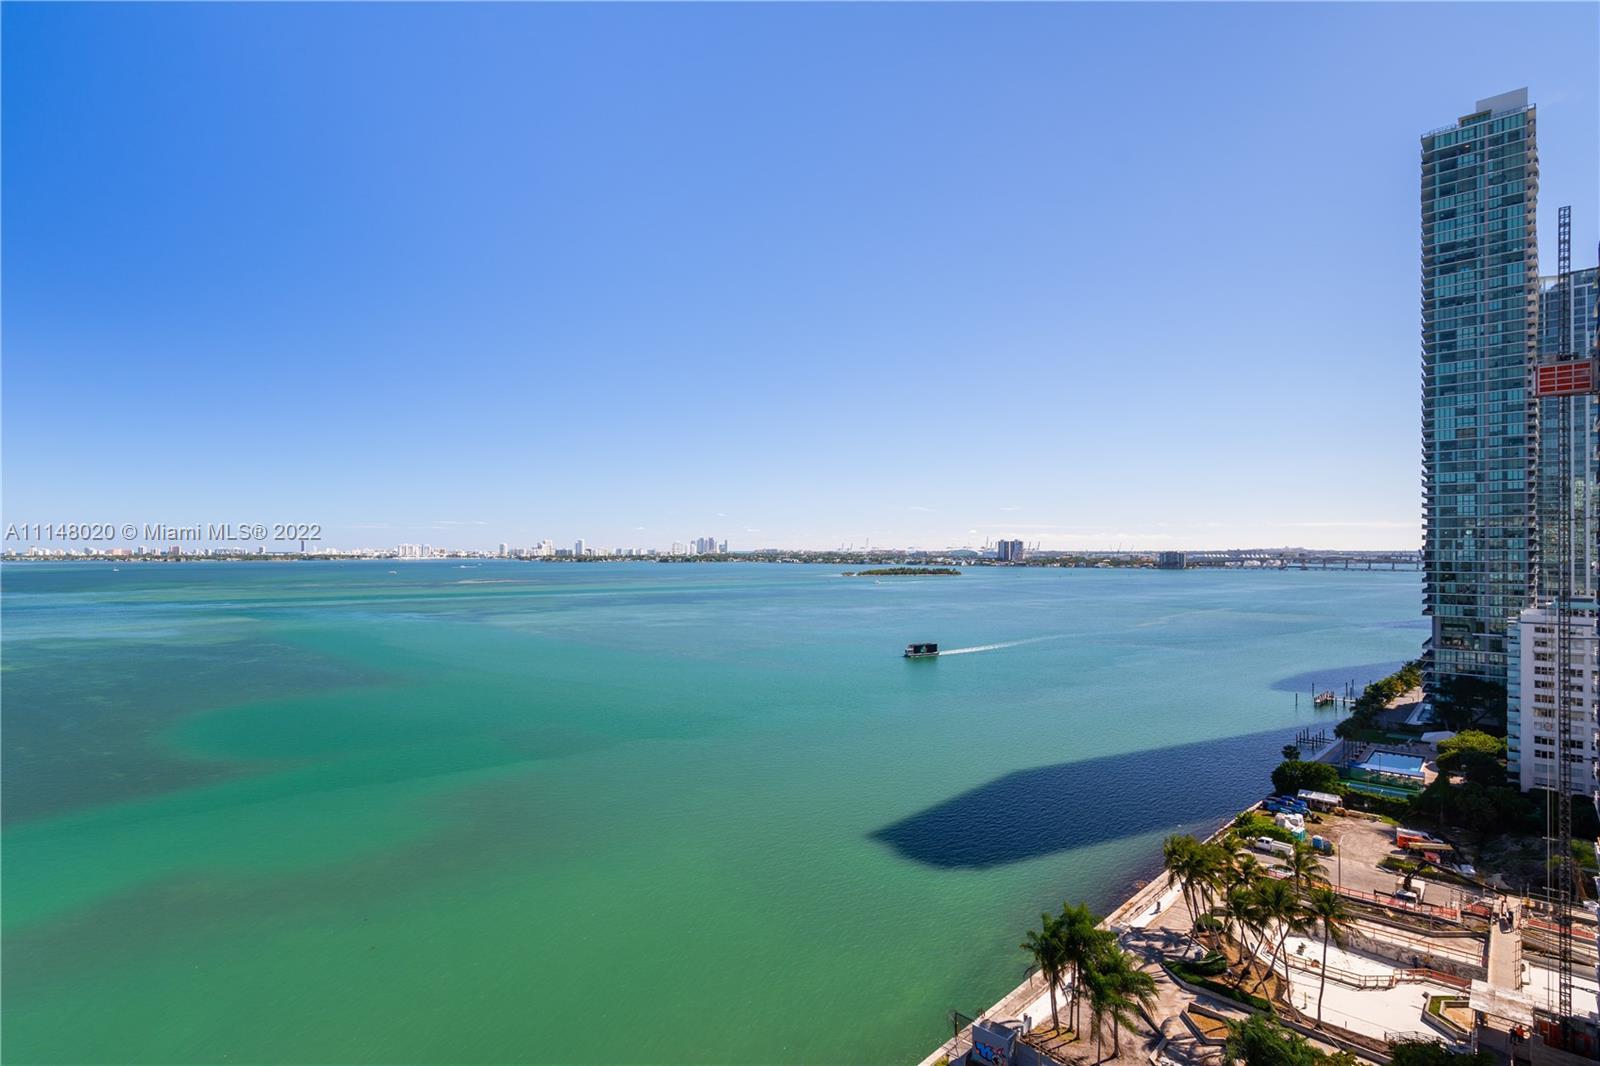 Wake up in this spacious 1/1.5 to sunrise ocean views overlooking cruise ships, Biscayne Bay, and So